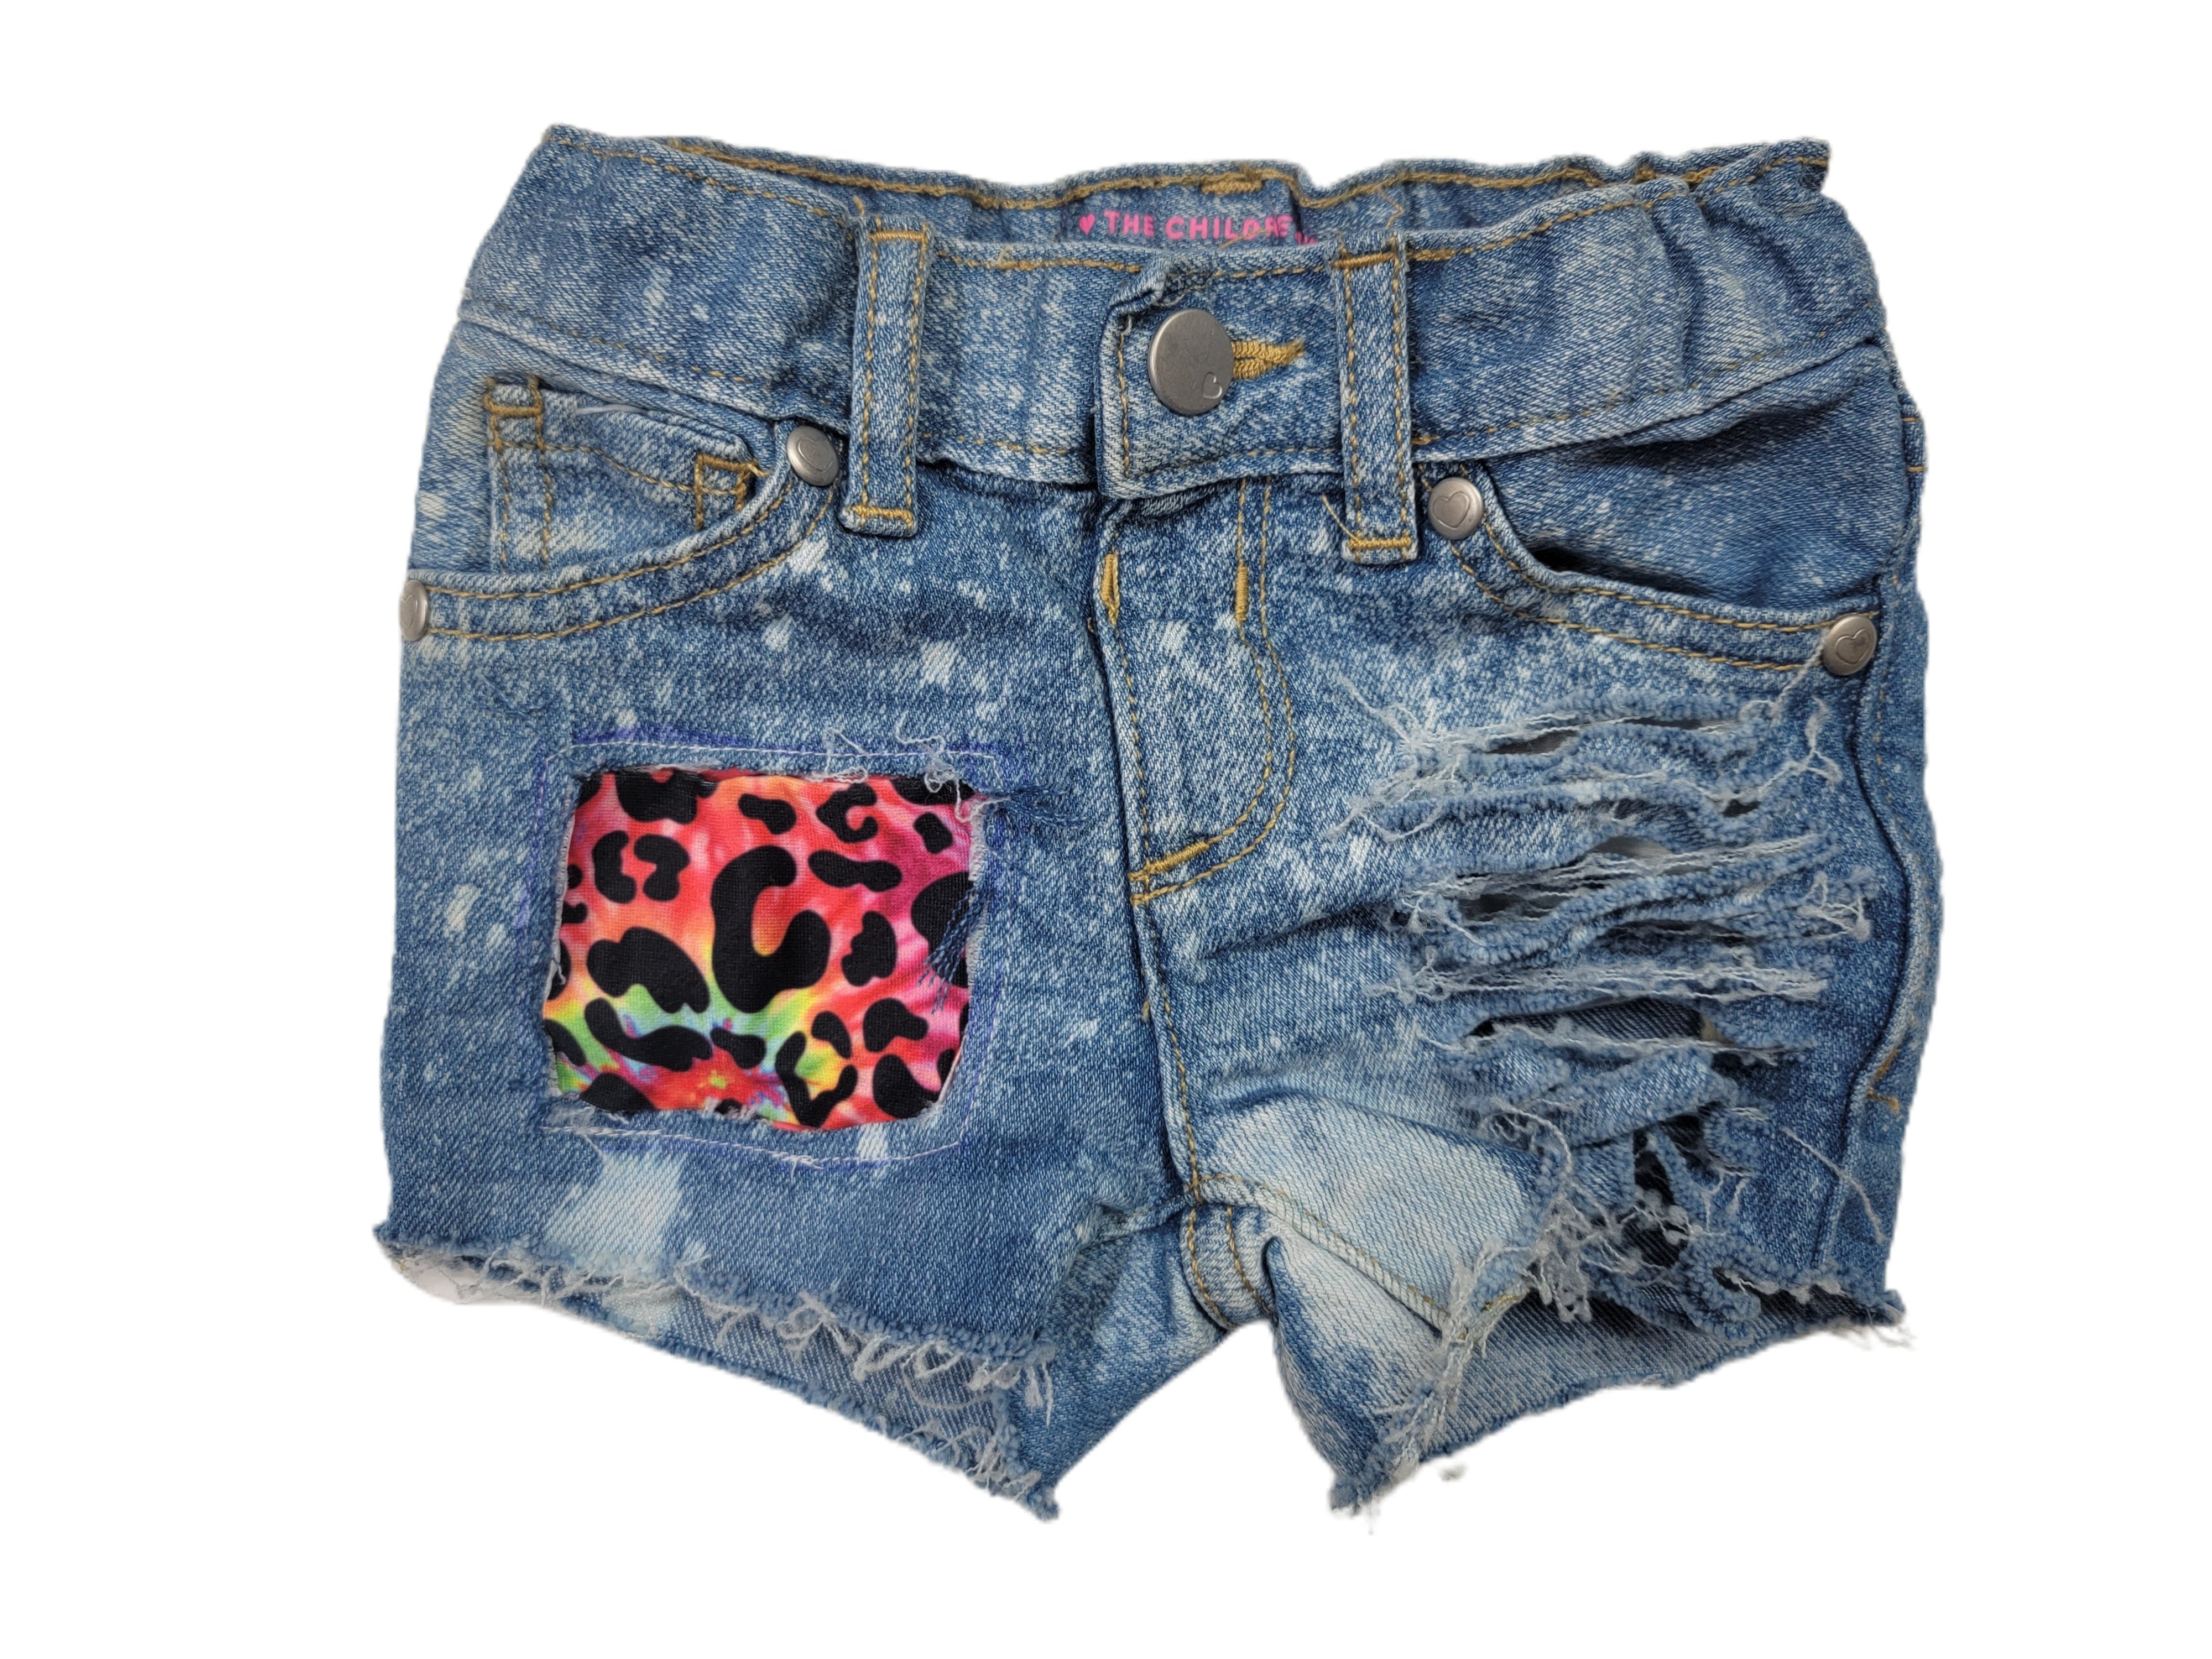 Neon Leopard Distressed Shorties and Super Shorties